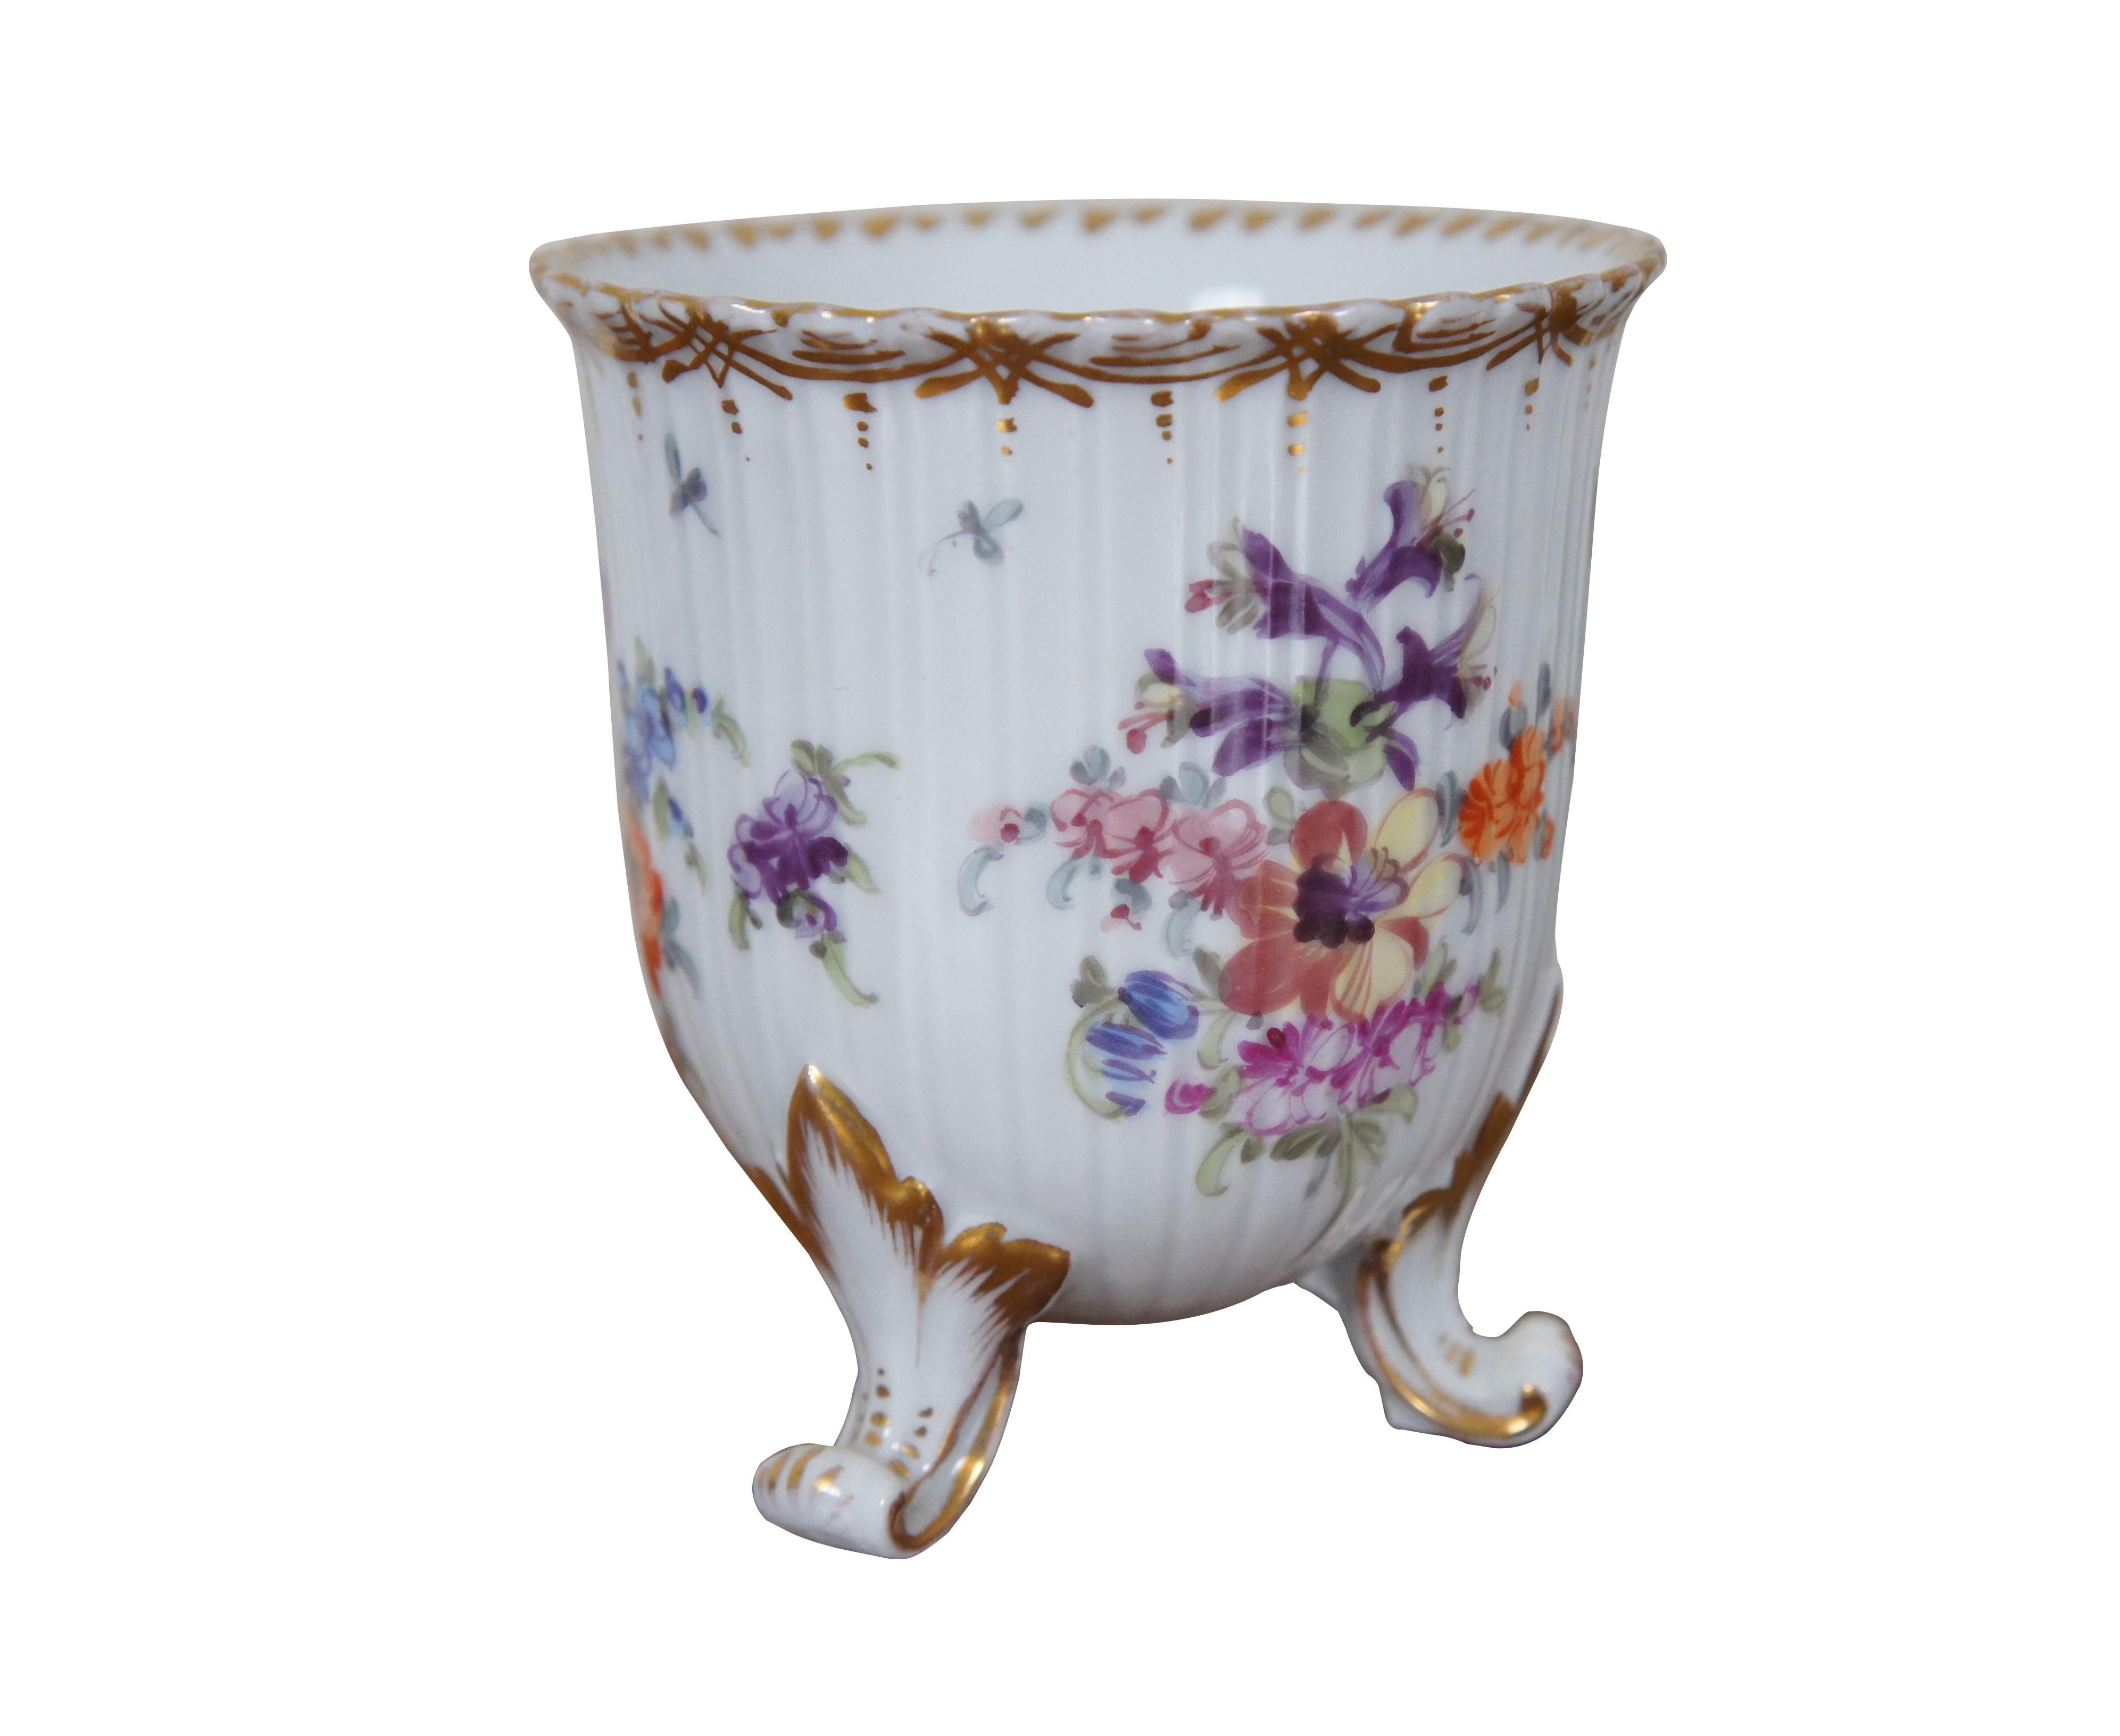 Hand-painted antique Dresden Porcelain with a floral motif and with the Dresden mark on the underside. Beautiful and a perfect example of period Dresden porcelain.

